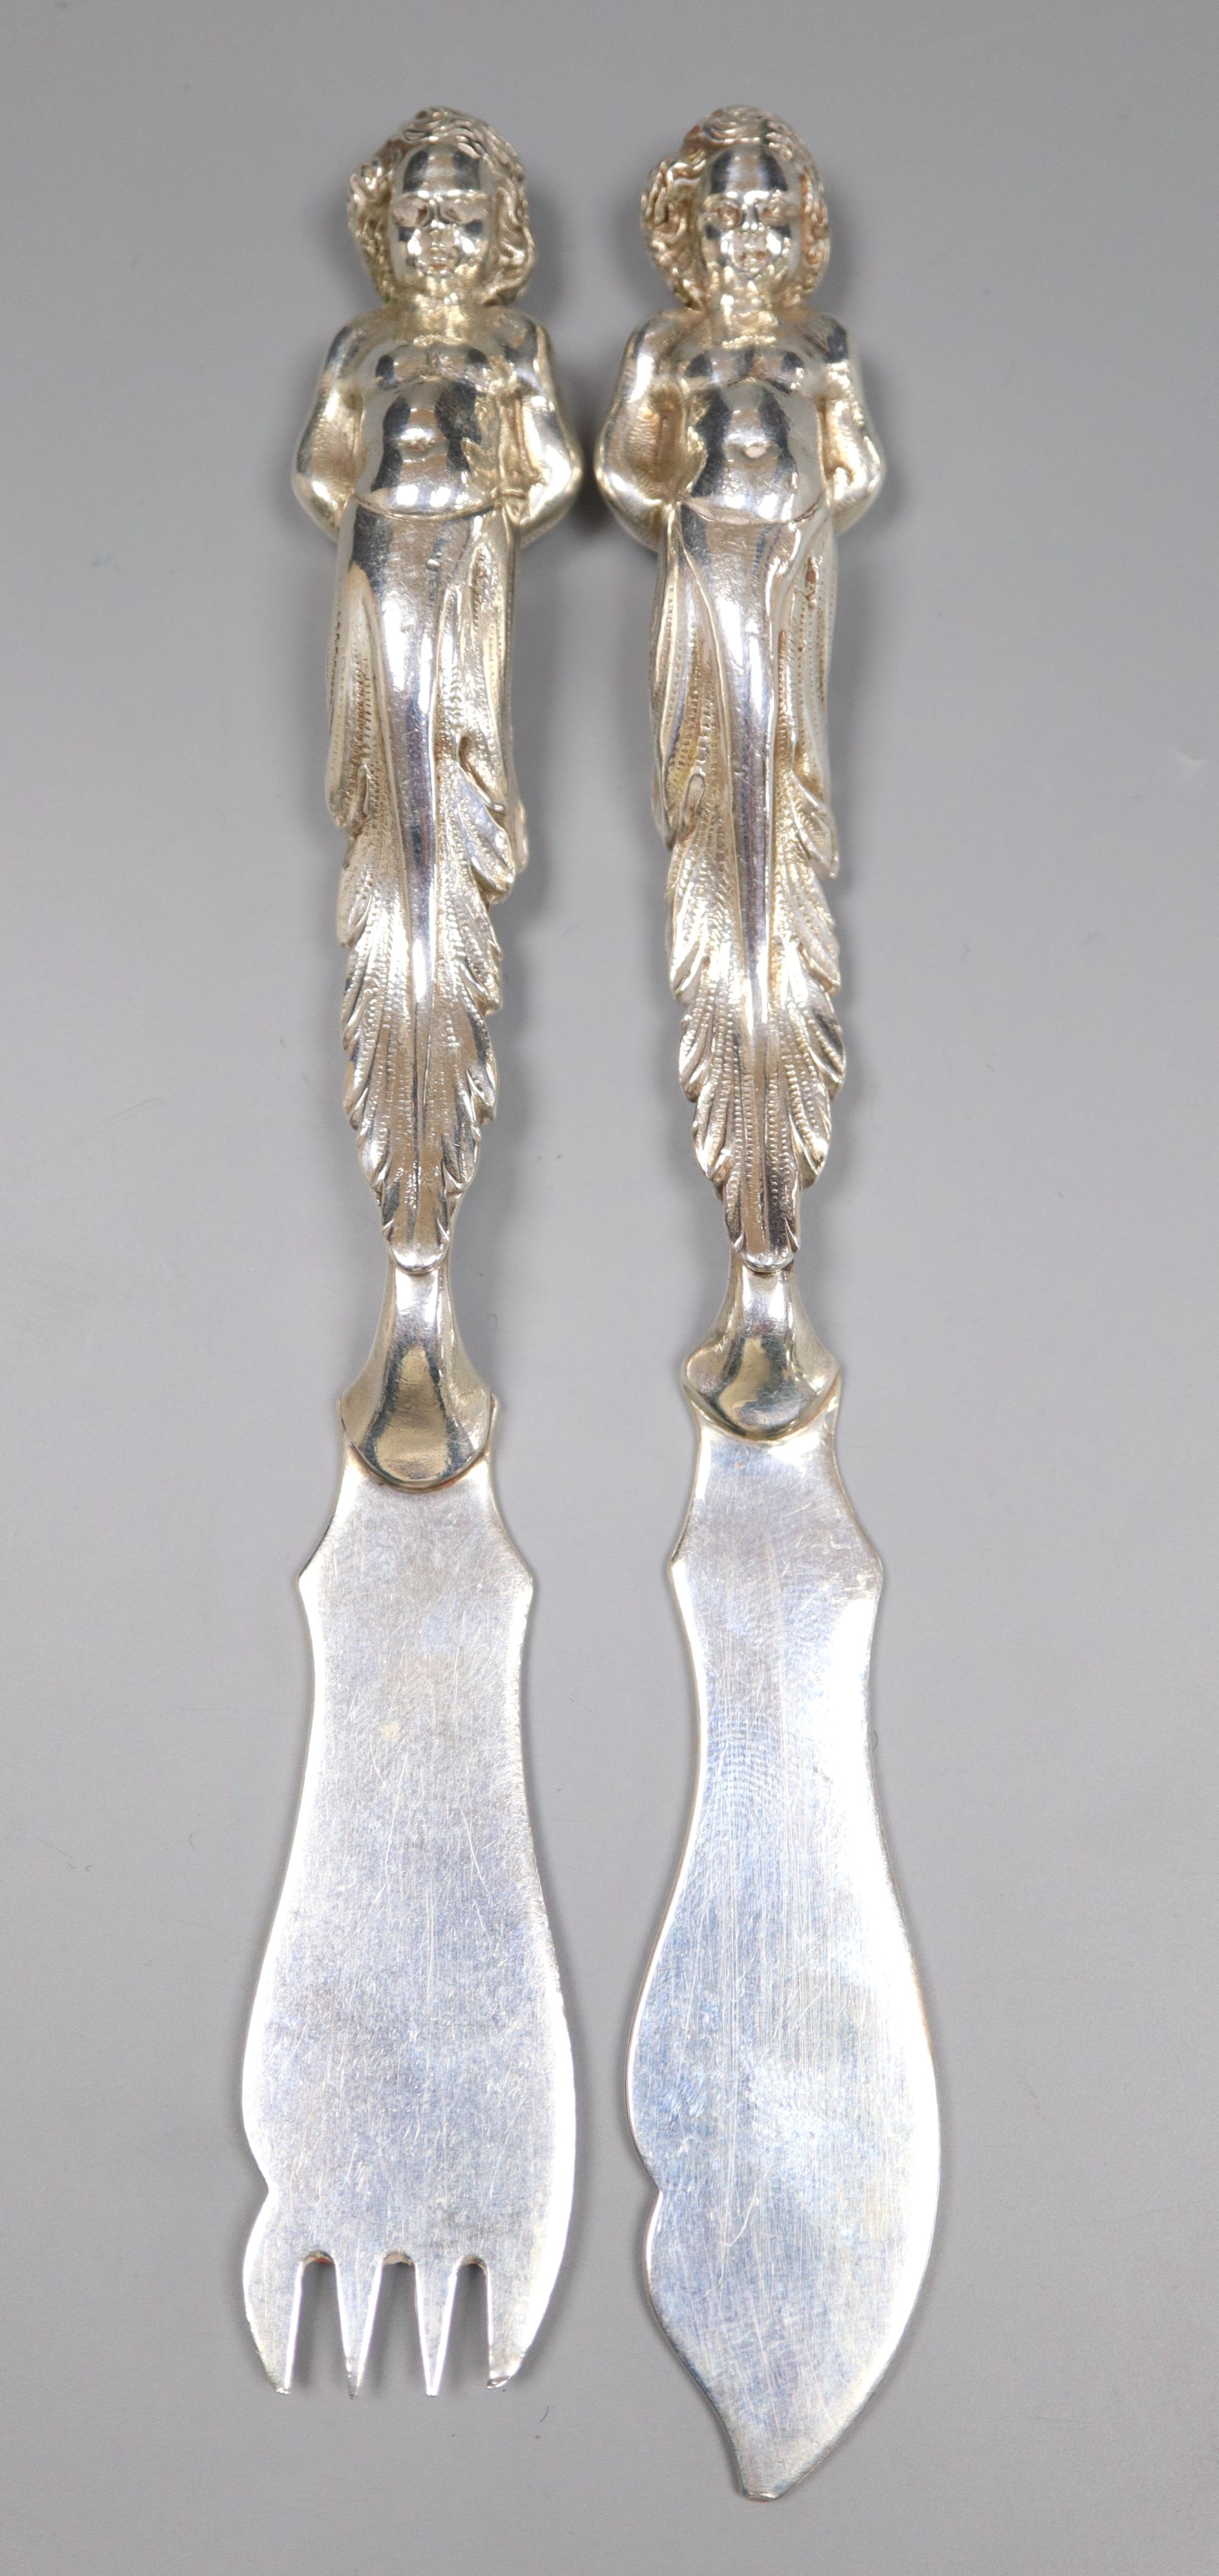 A pair of late Victorian silver fish eaters with figural handles by Goldsmiths & Silversmiths Co Ltd, London, 1898,